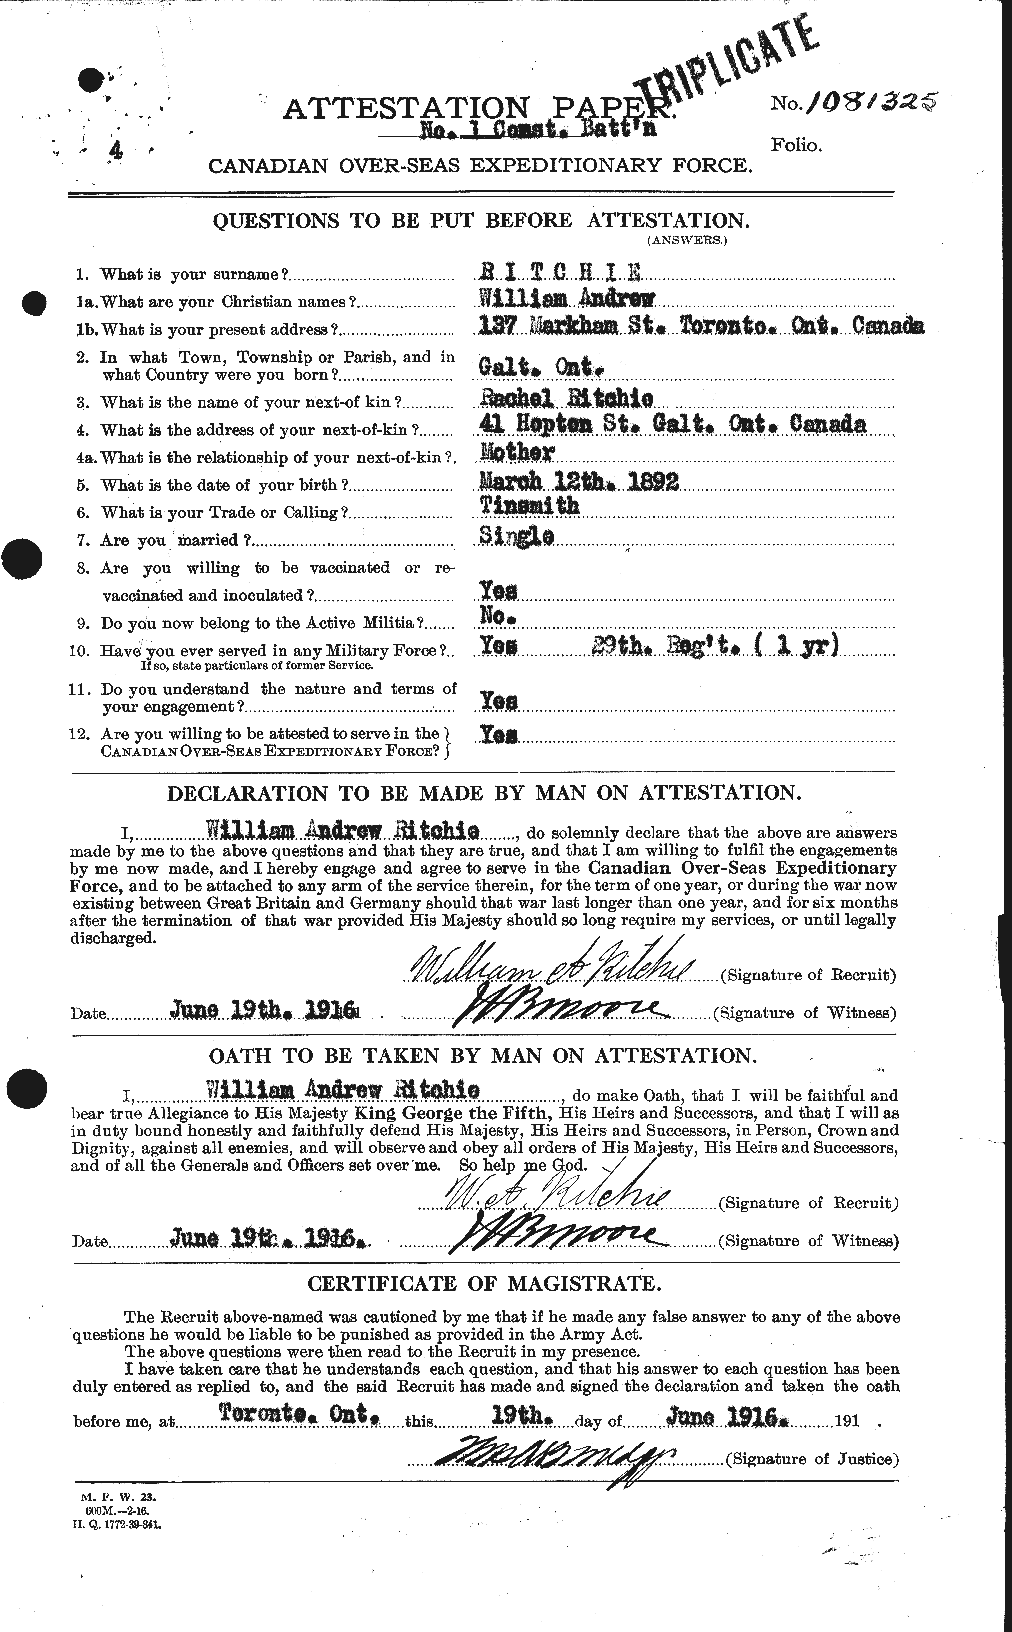 Personnel Records of the First World War - CEF 605568a